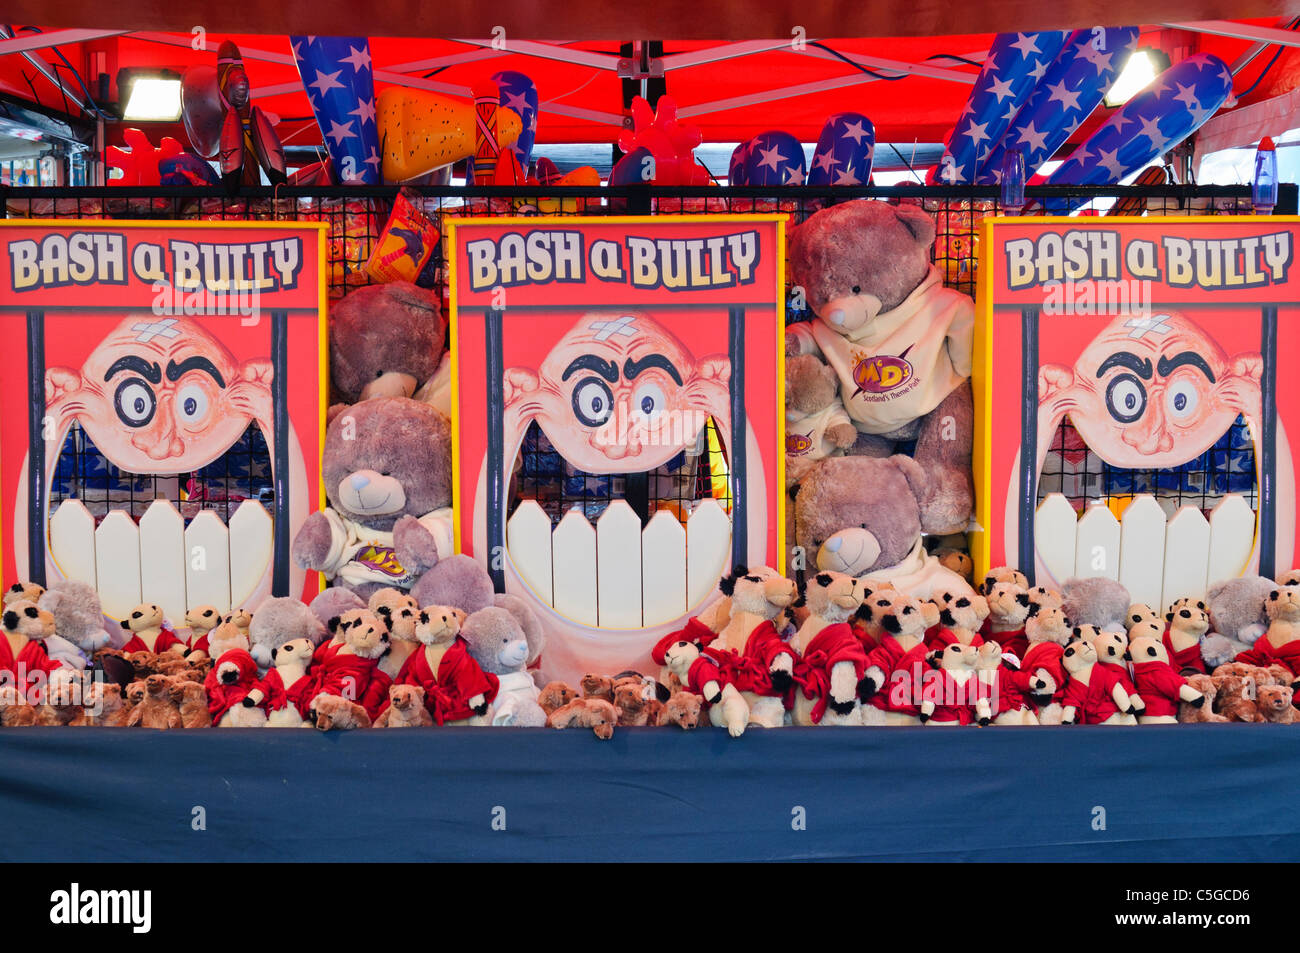 'Bash The Bully' game at a funfair Stock Photo